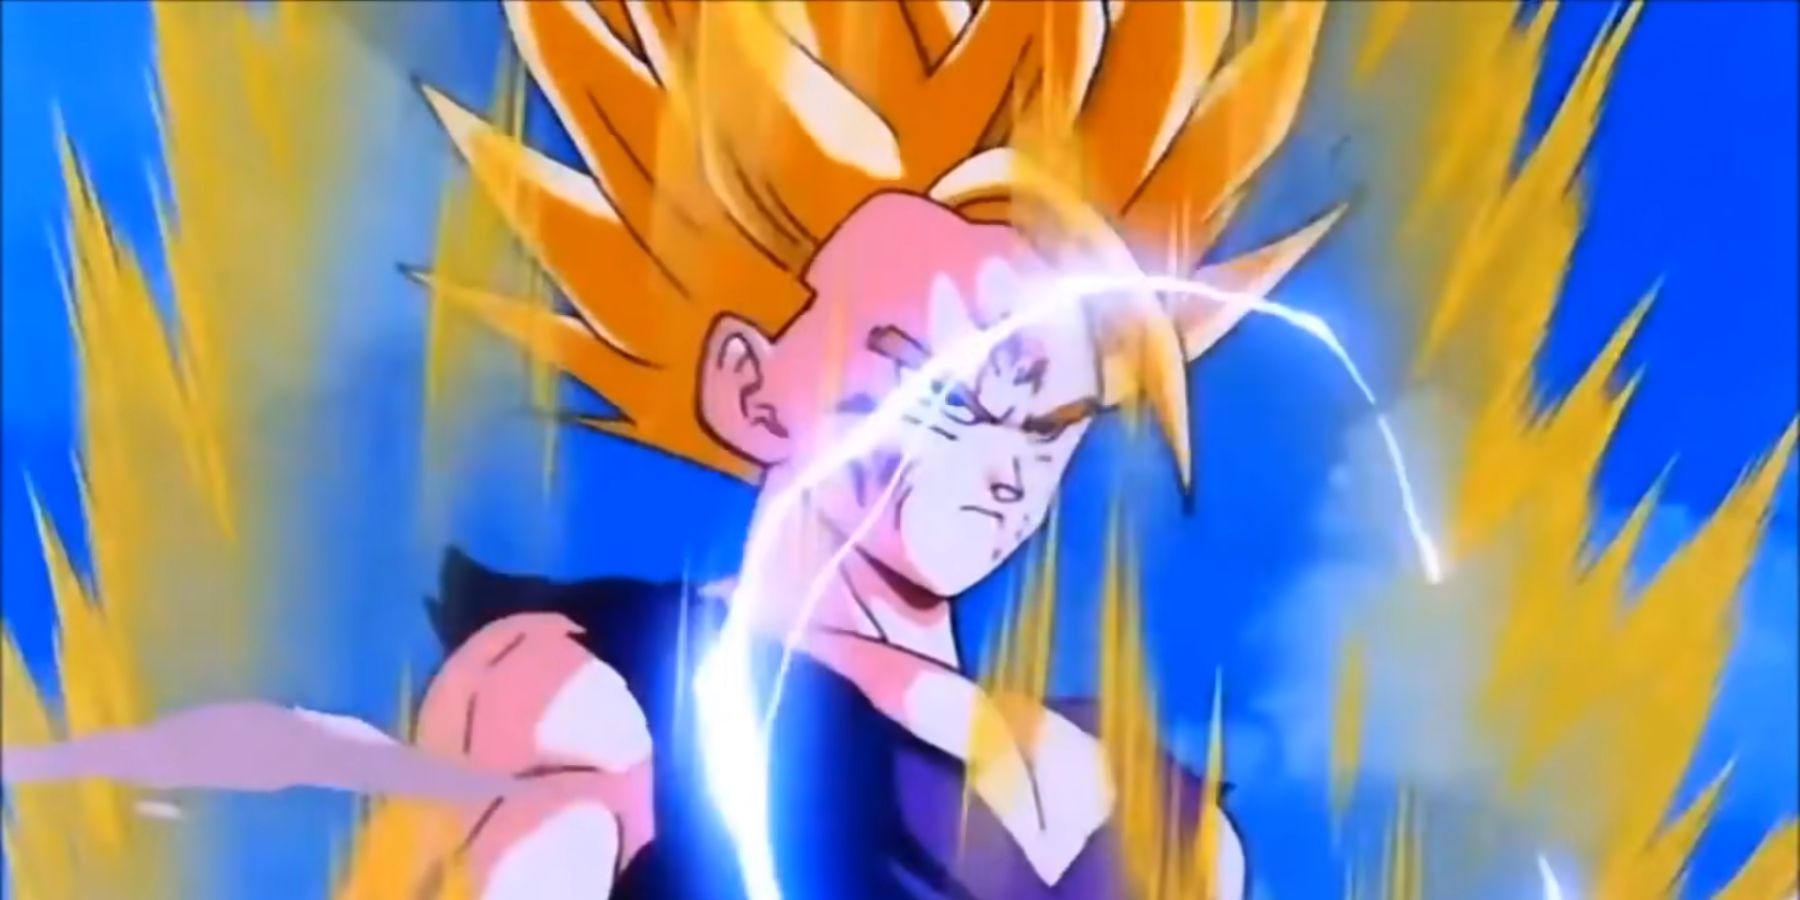 Gohan achieving Super Saiyan 2 for the first time in Dragon Ball Z